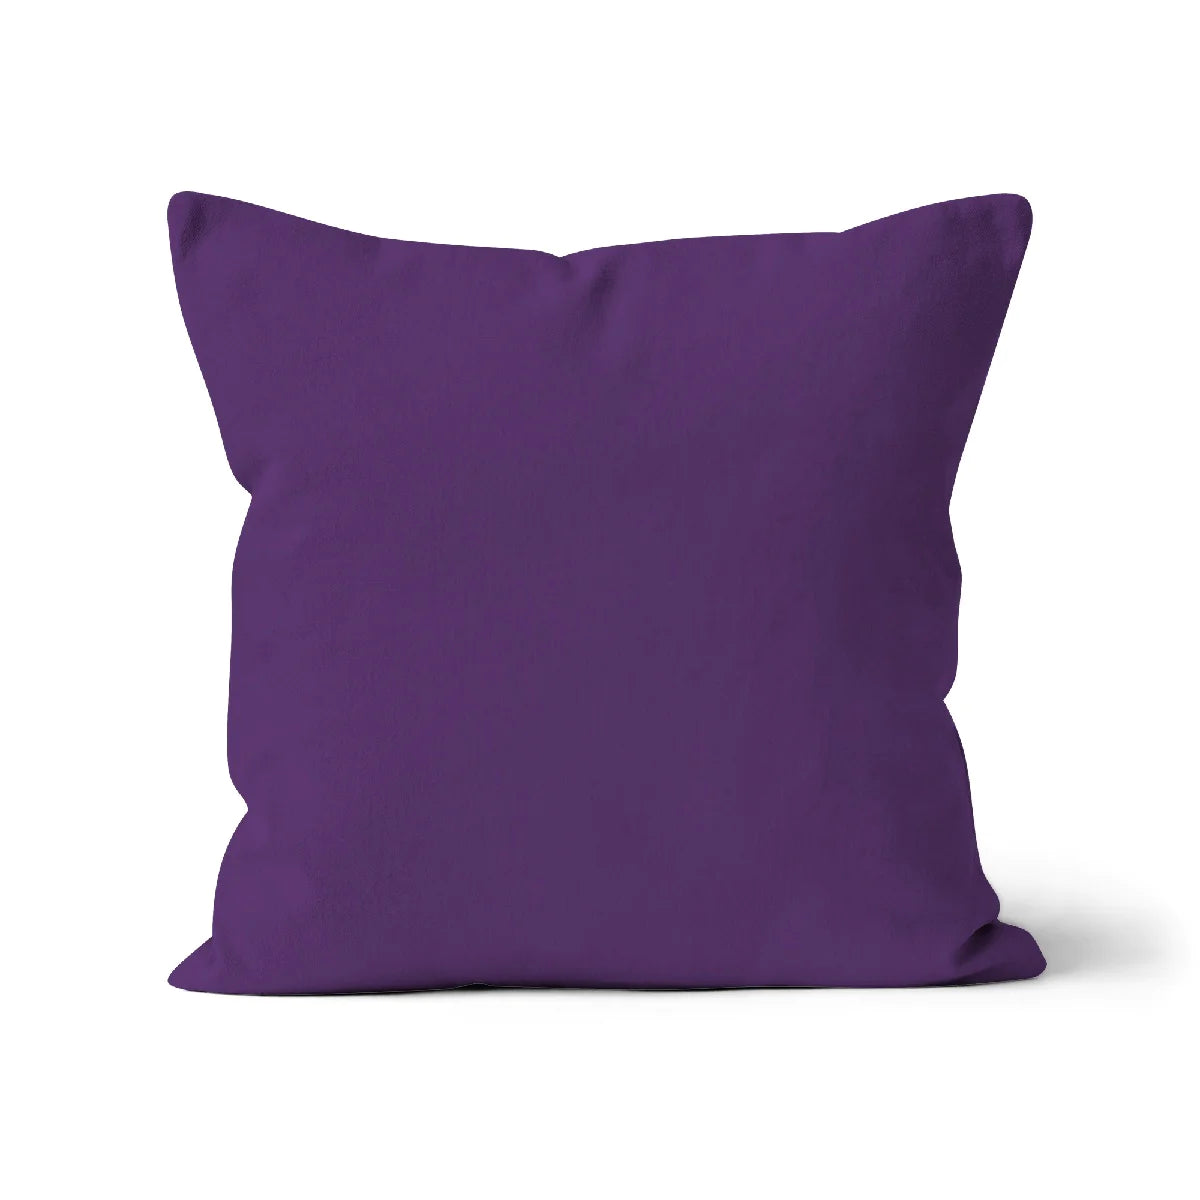 Dark purple cotton cushion cover. Made in the UK. Square cushion cover.